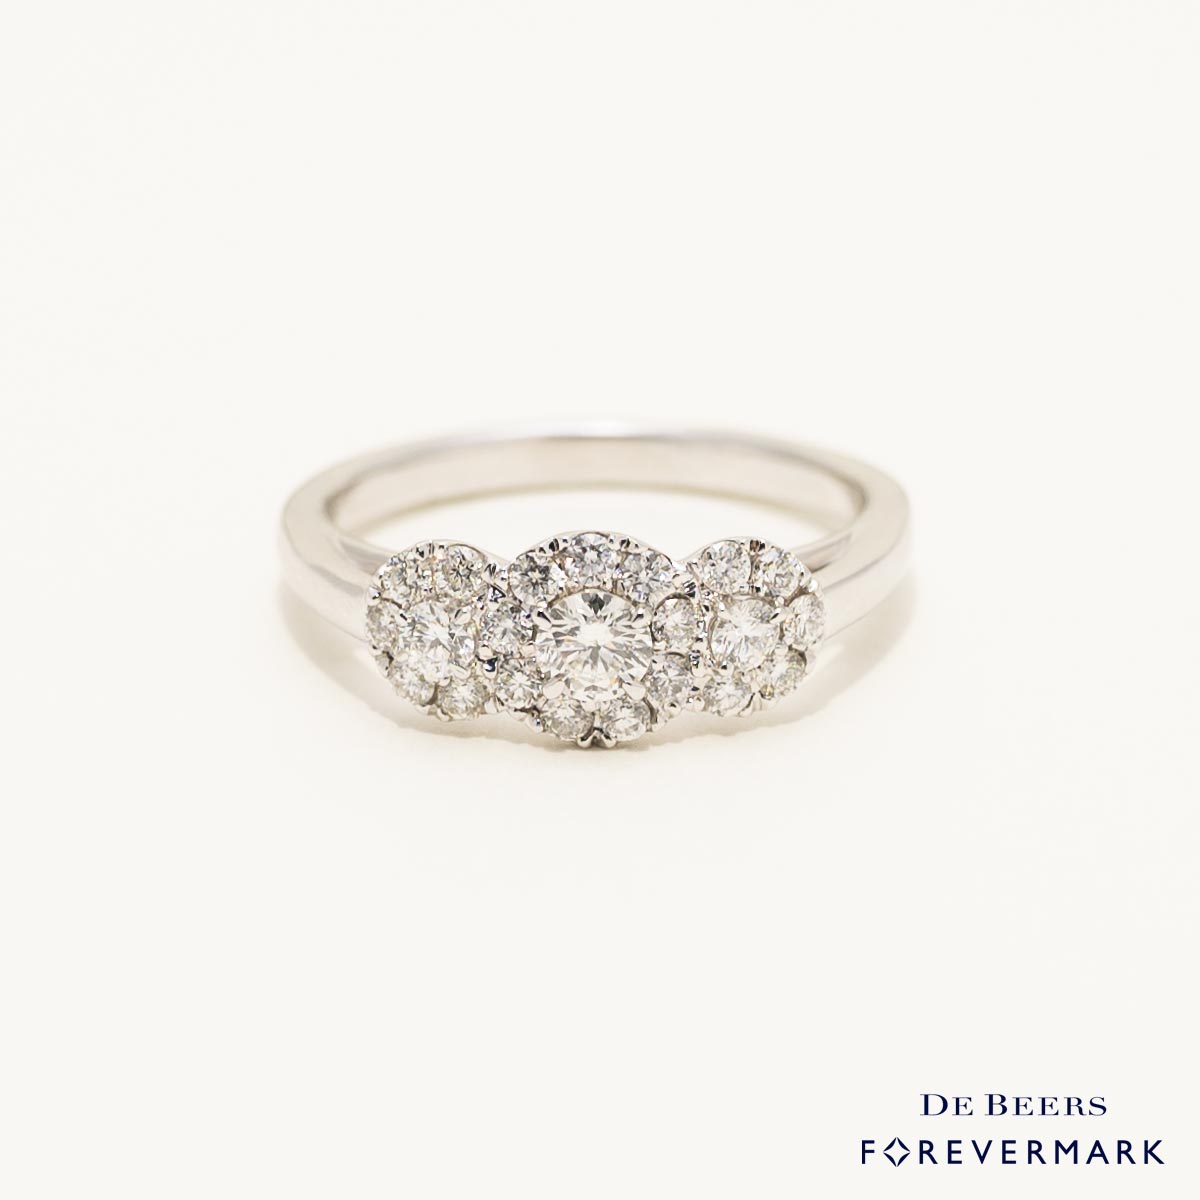 De Beers Forevermark Center of my Universe Diamond Three Stone Halo Ring in 18kt White Gold (5/8ct tw)